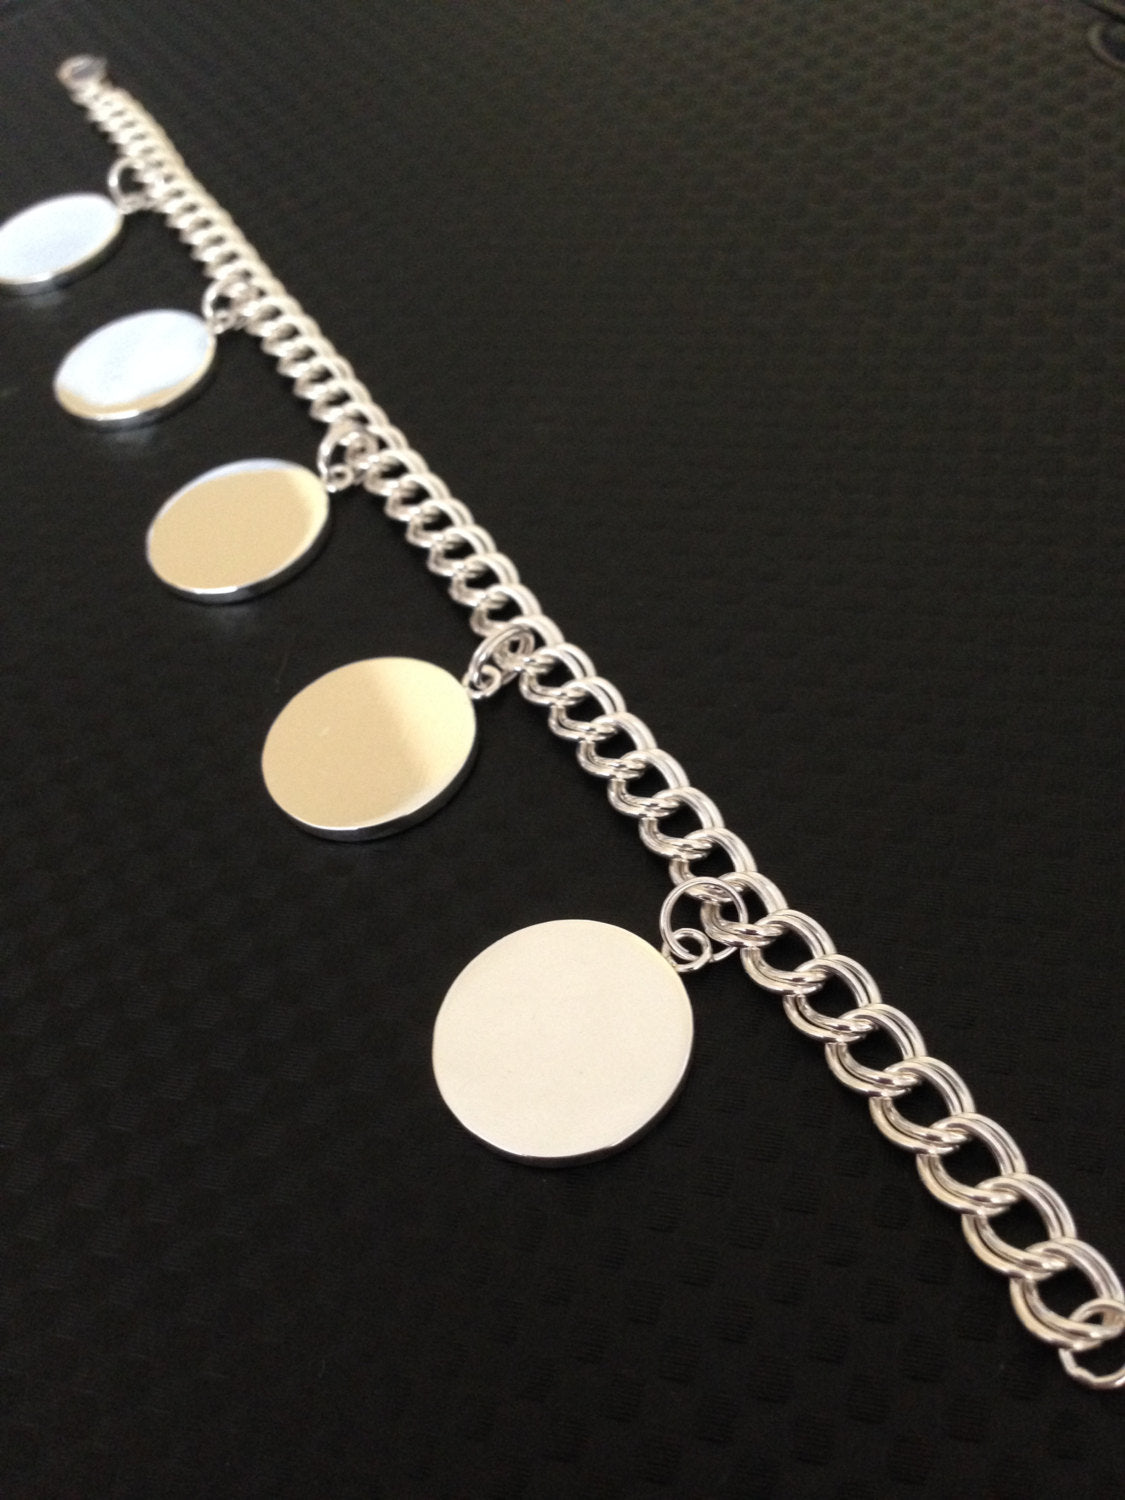 5 Silver-Filled Drops on 7-Inch Sterling Silver Bracelet (pins not included)